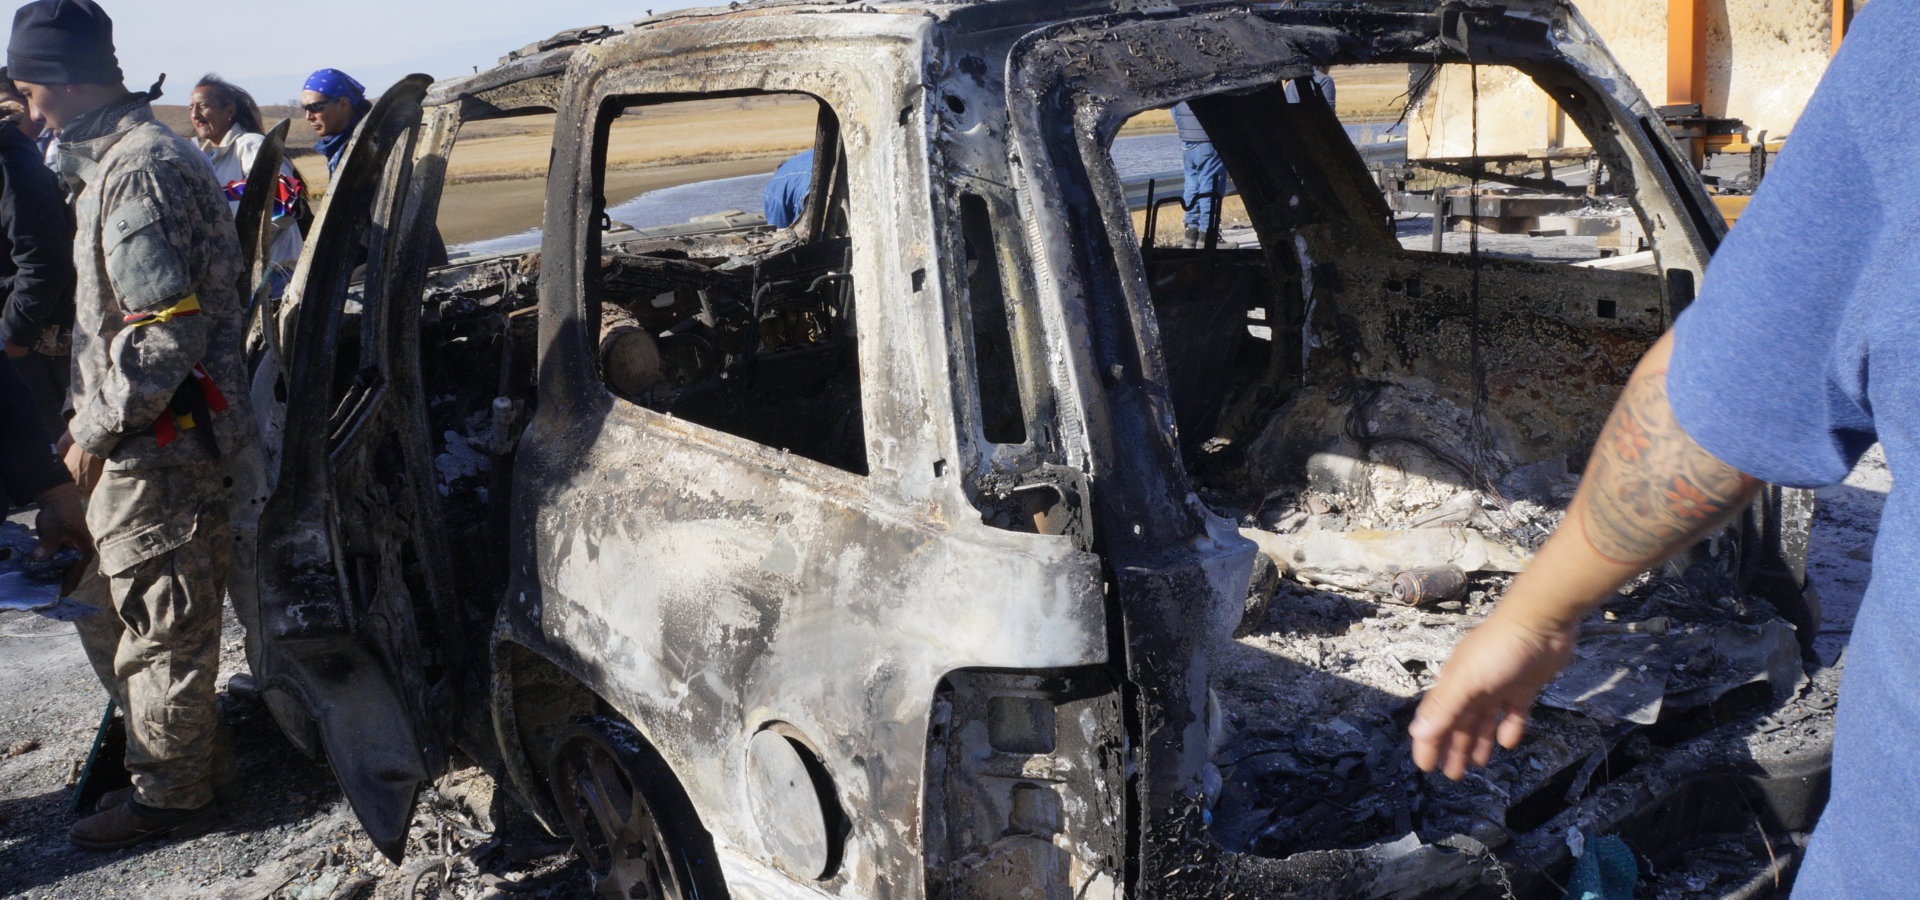 The remnants of a vehicle burned on North Dakota Highway 1806 on the night of Oct. 27, 2016. Non-peaceful forces embedded on the side of the water protectors were seen burning the vehicle and two armored vehicles over the protests of water protectors. (Derrick Broze for MintPress)